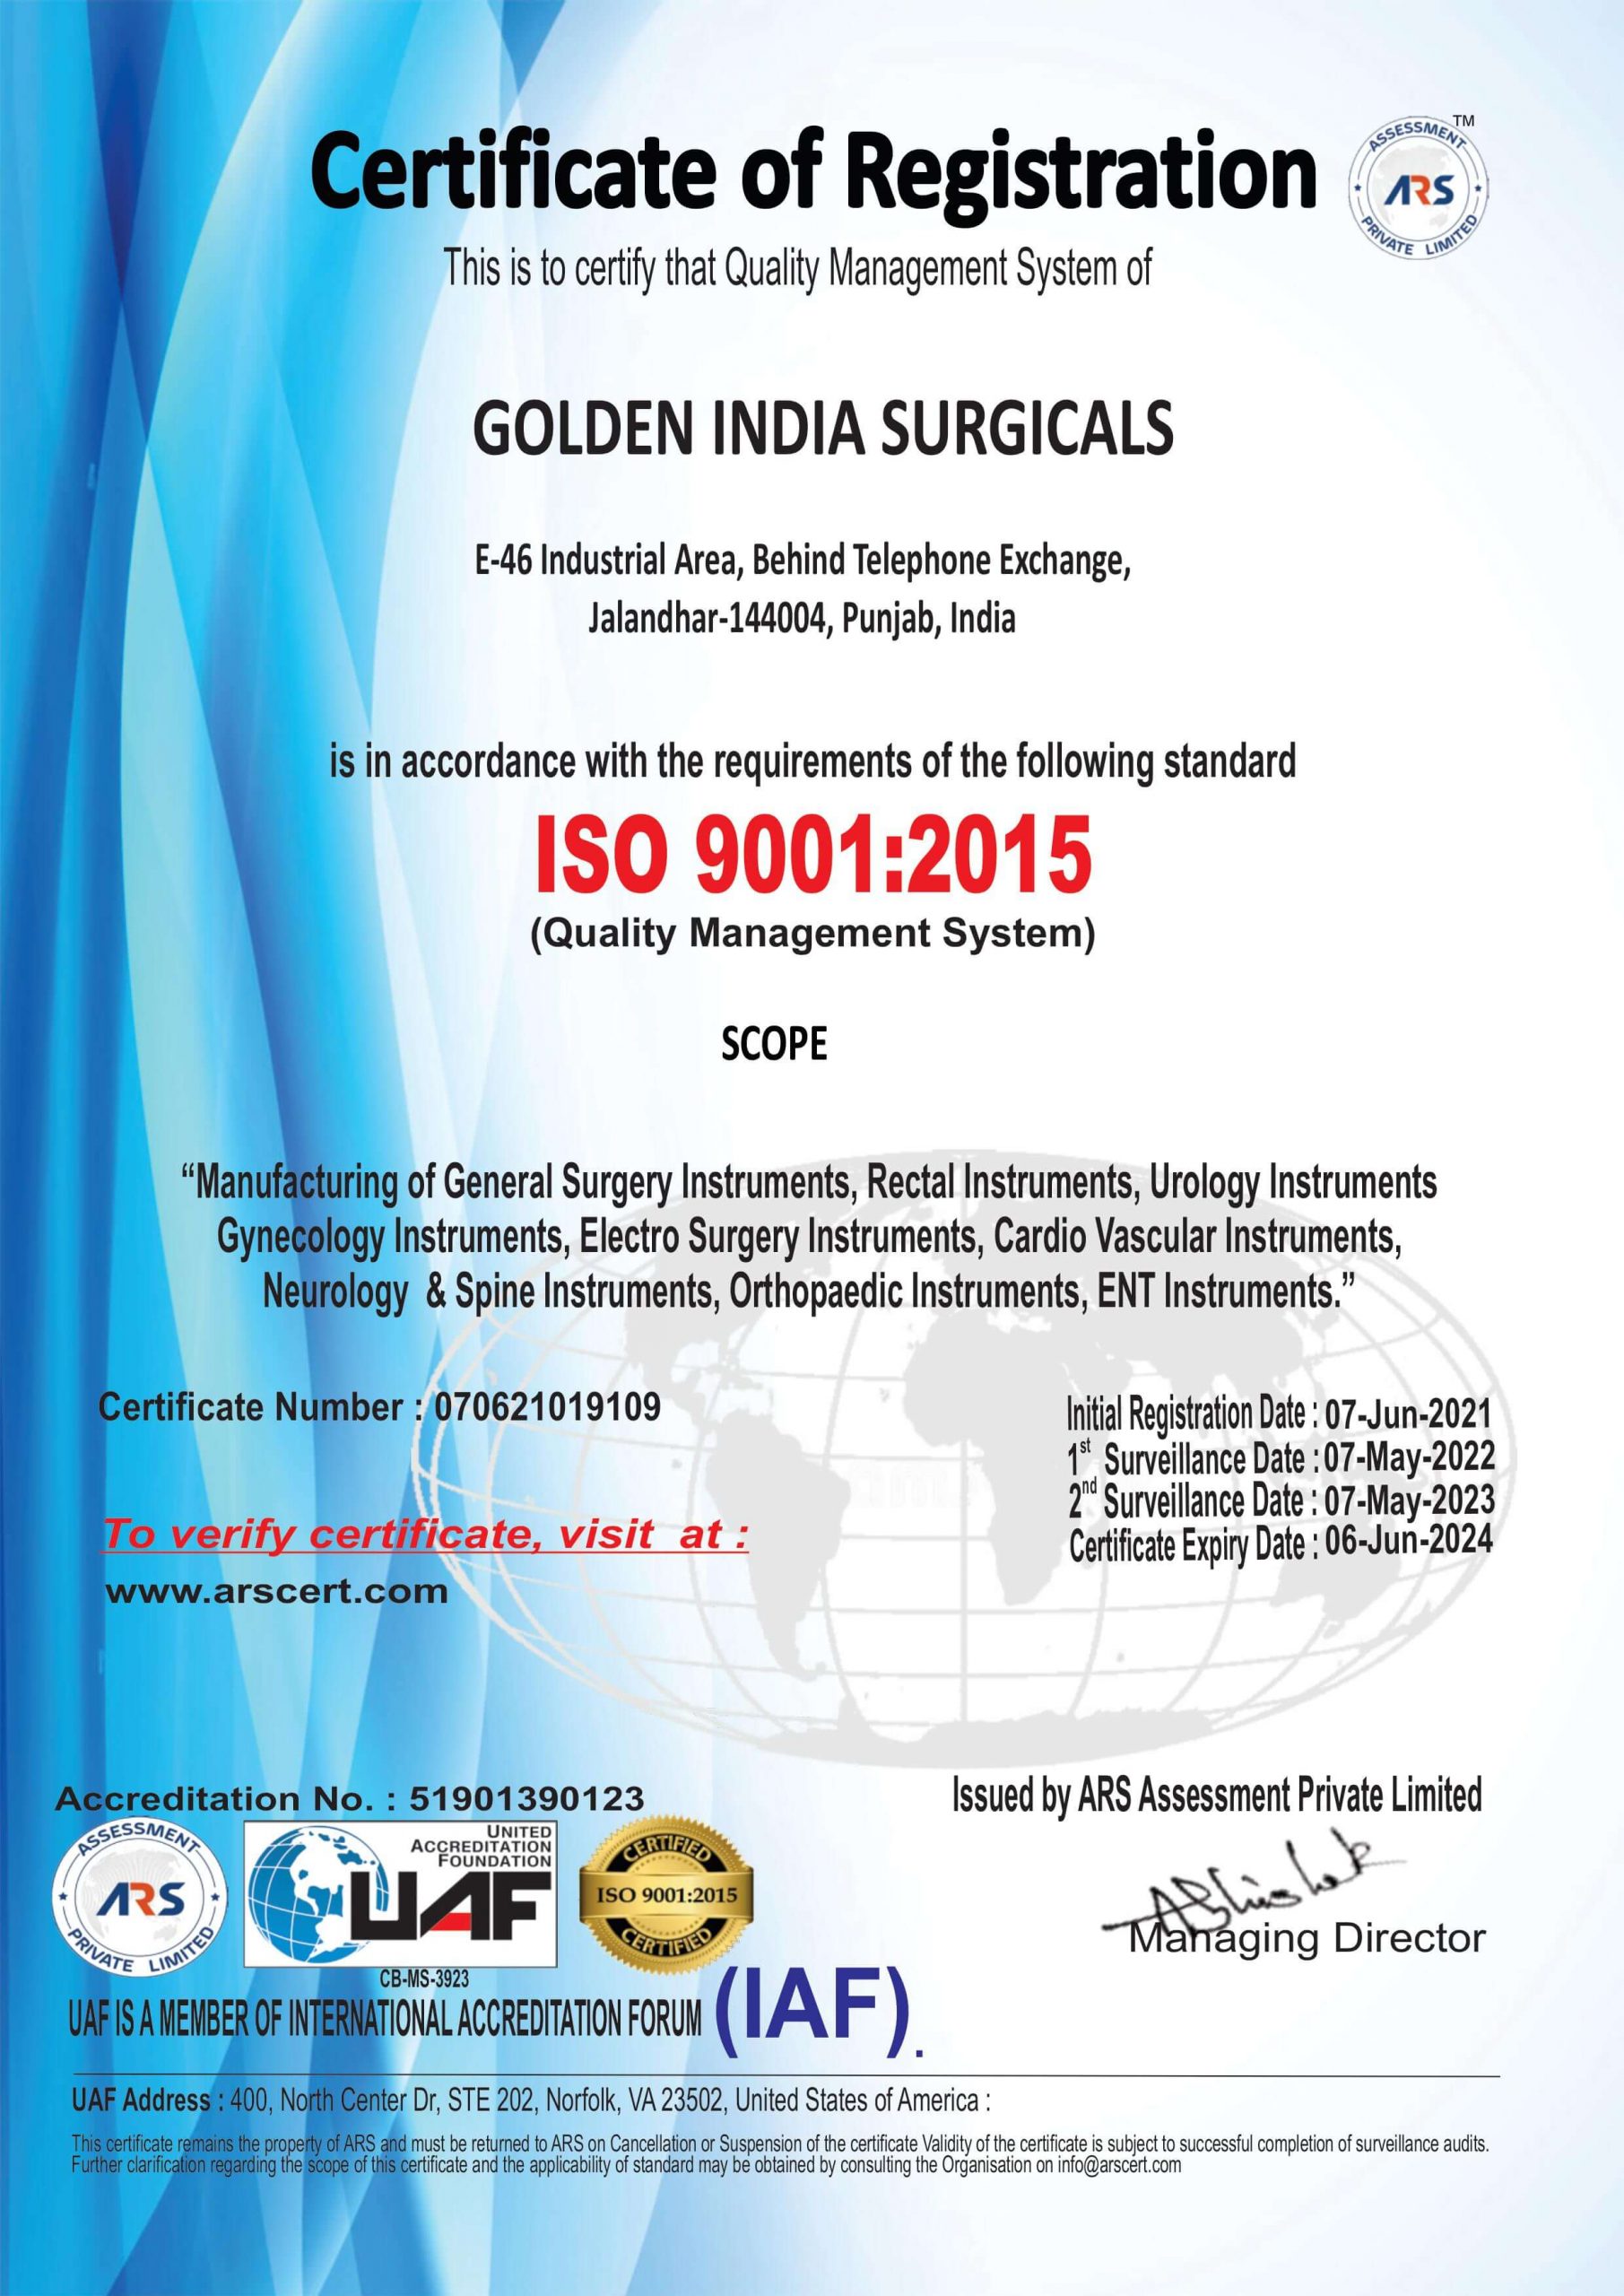 GOLDEN INDIA SURGICALS (ISO 9001:2015)